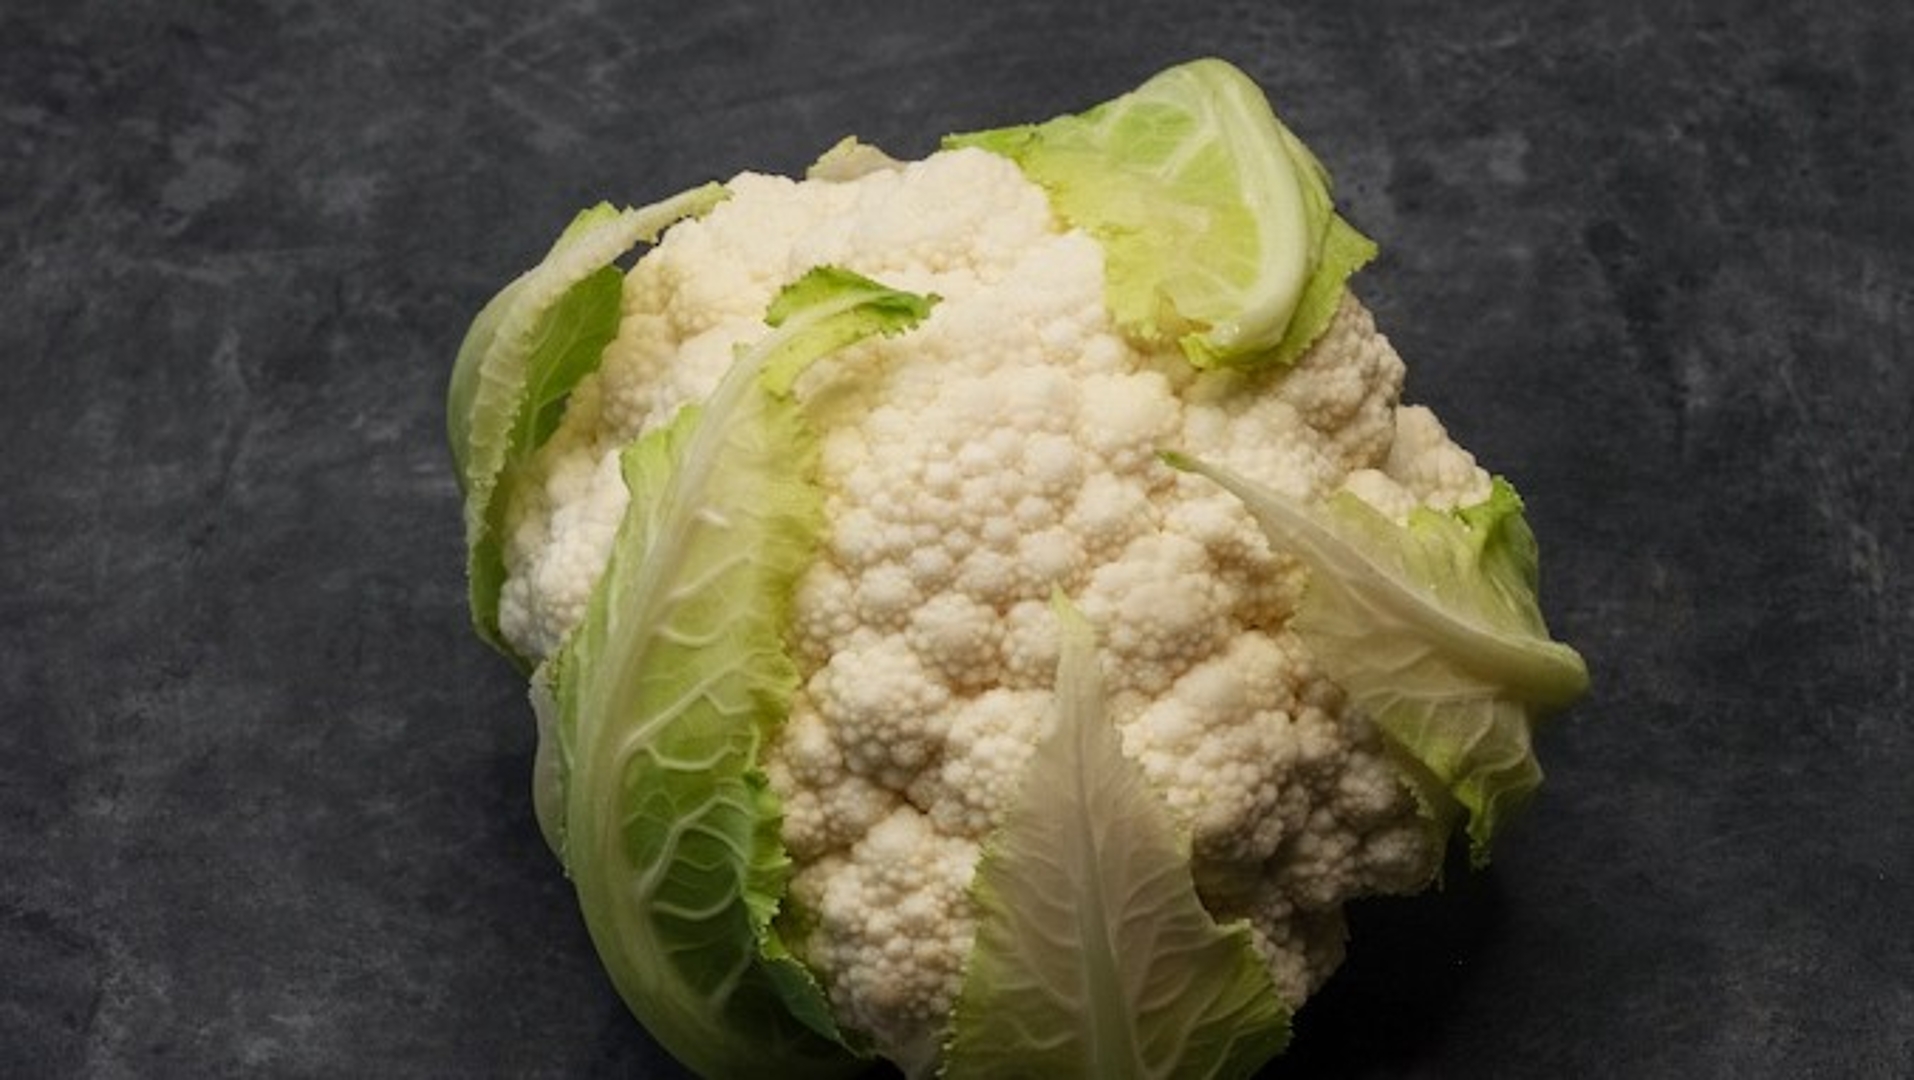 Cauliflower: the bloom of the brassica family